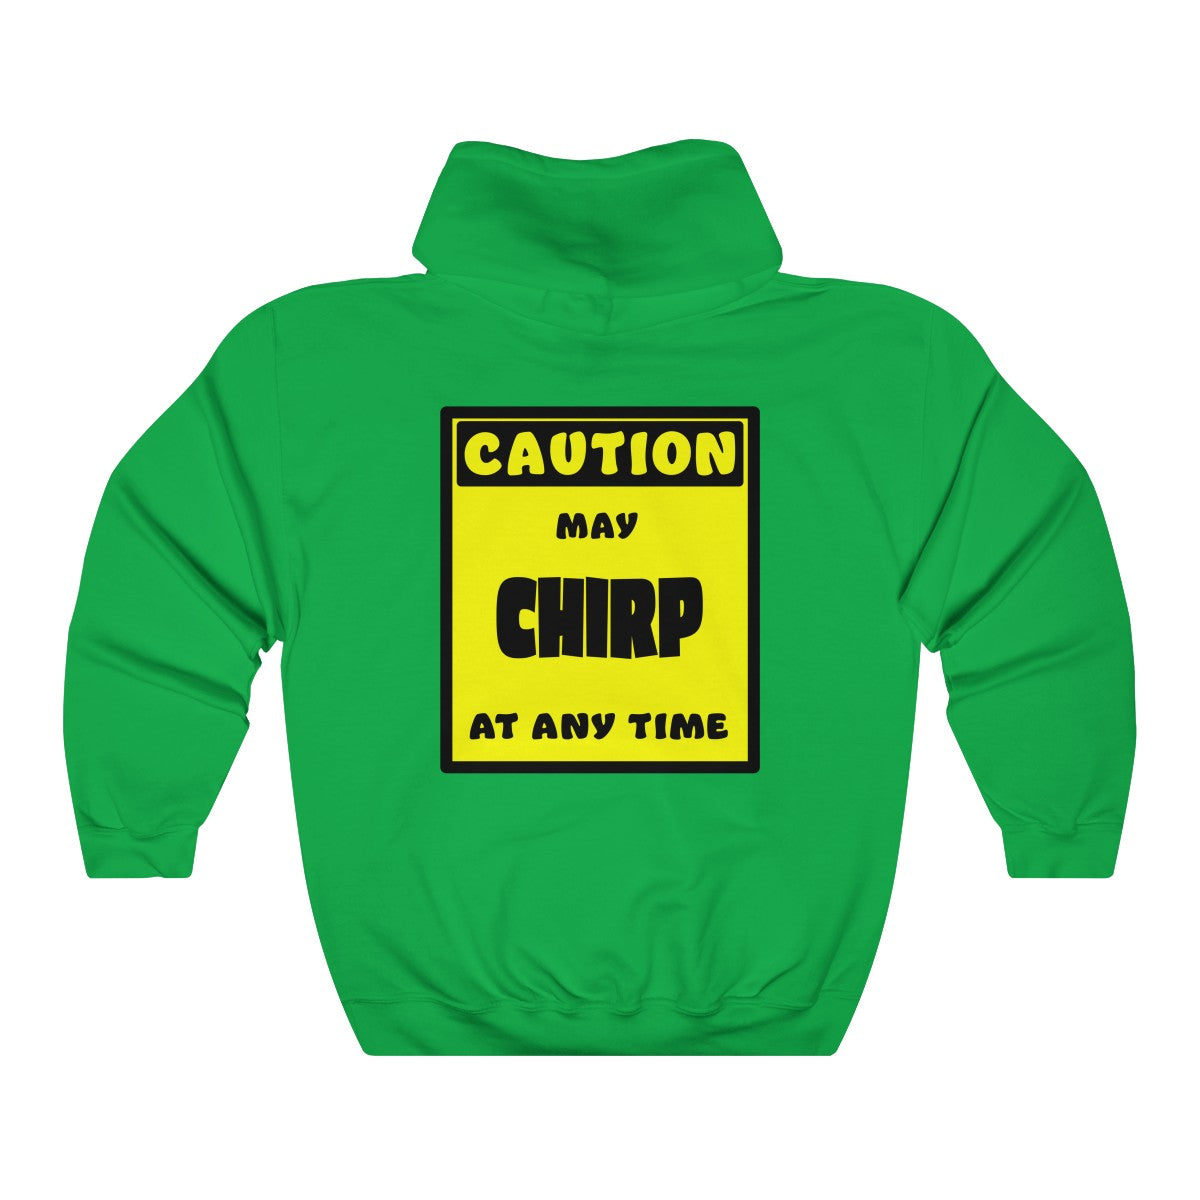 CAUTION! May CHIRP at any time! - Hoodie Hoodie AFLT-Whootorca Green S 